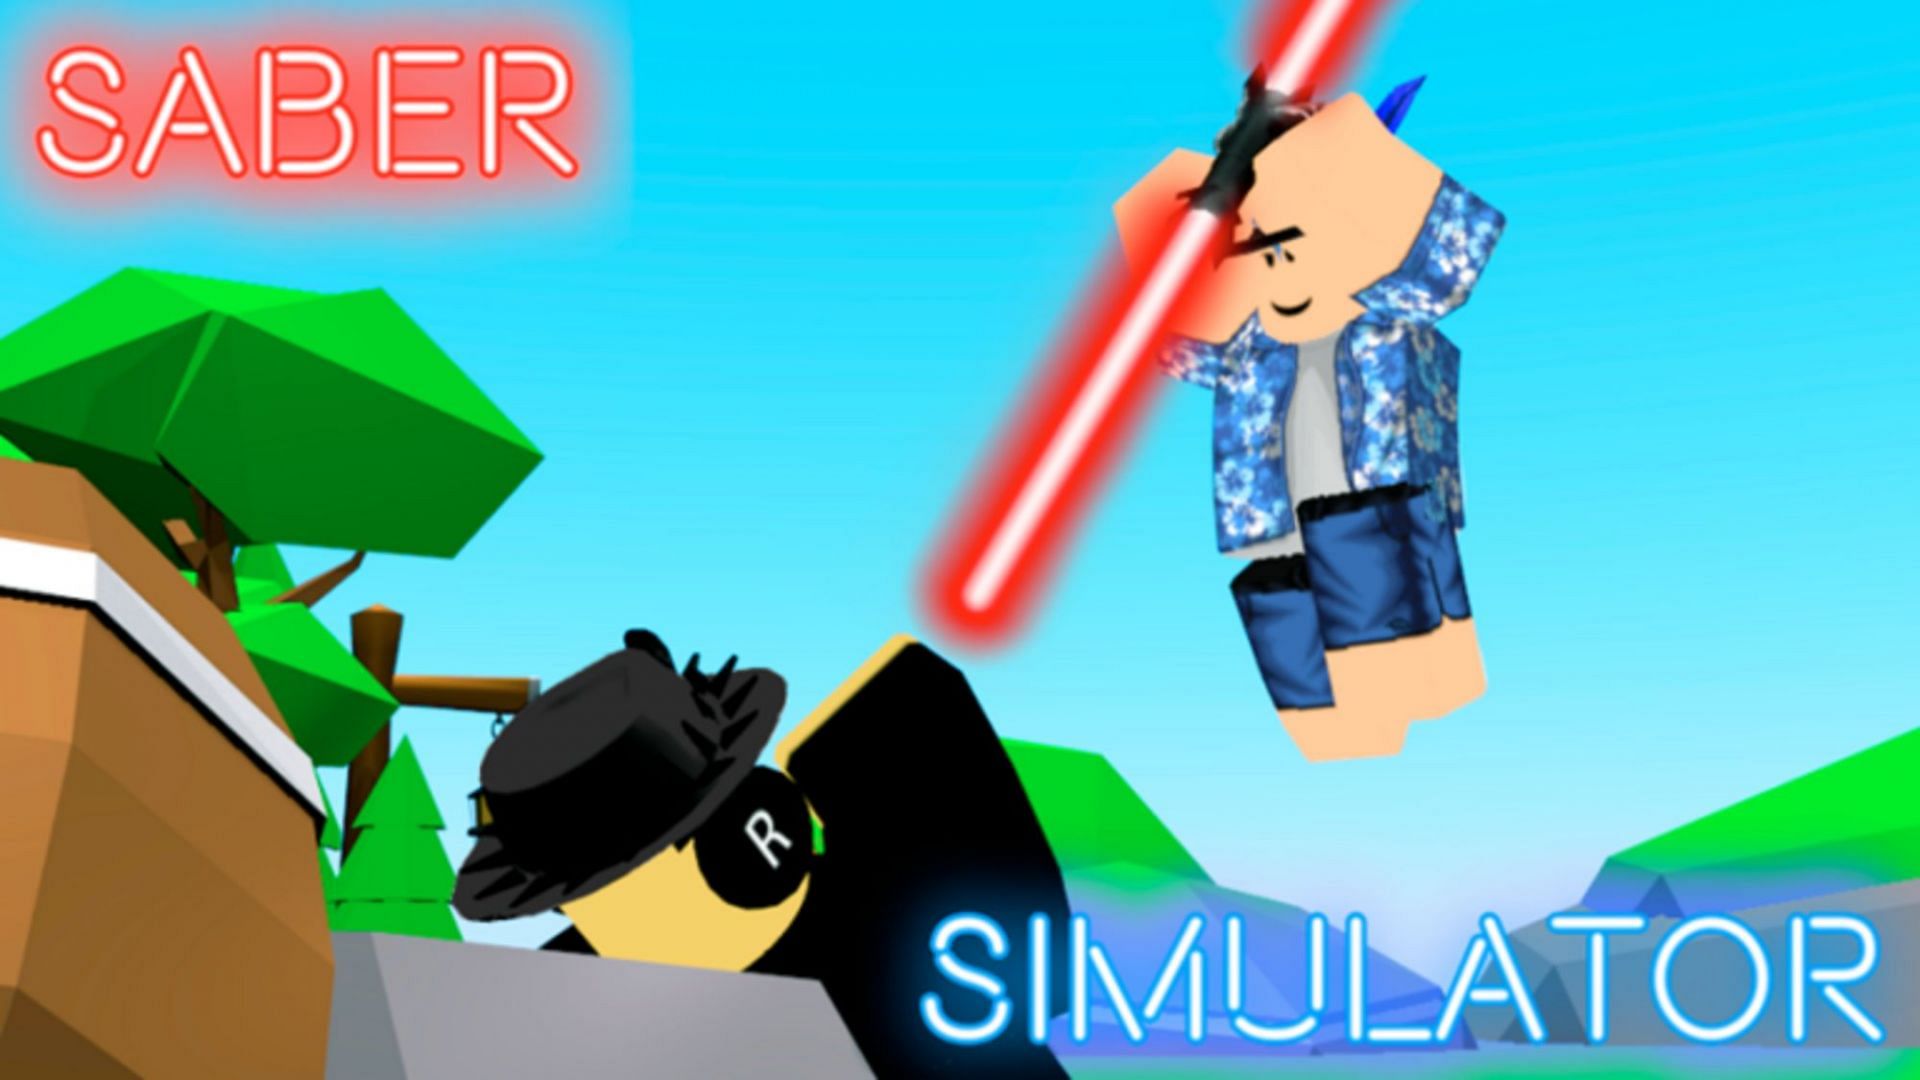 Enjoy fighting with sabers in Roblox Saber Simulator (Image via Roblox)